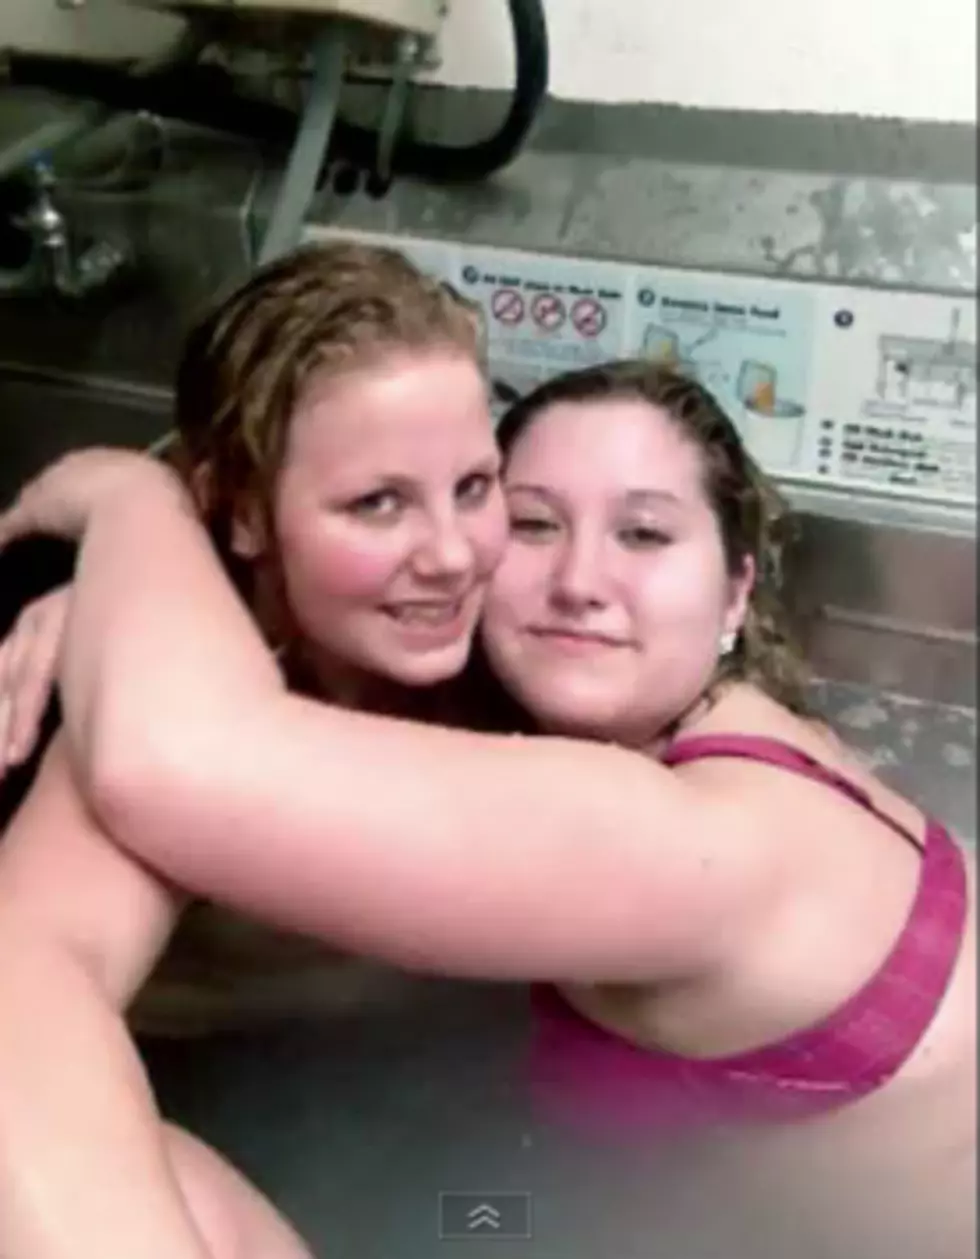 KFC Fires Three Girls For Taking a Bath in The Kitchen Sink [VIDEO]